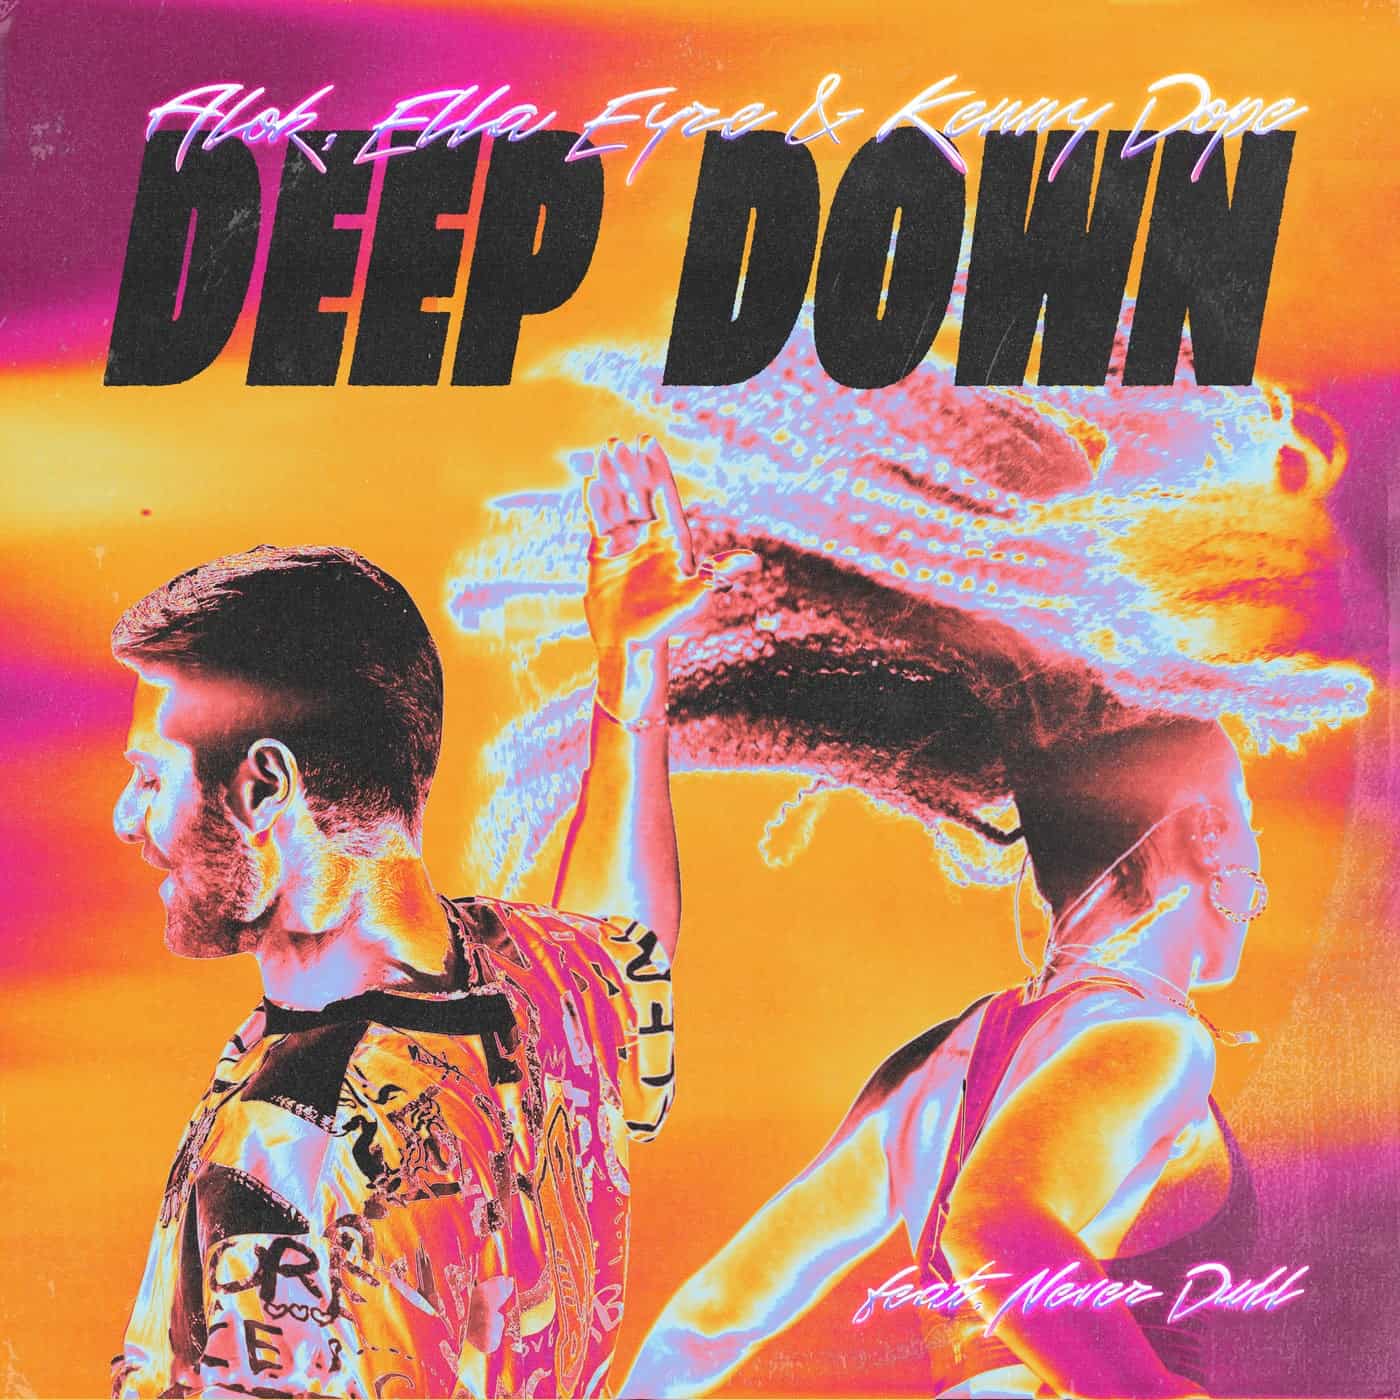 Download Kenny Dope, Alok, Ella Eyre, Never Dull - Deep Down on Electrobuzz